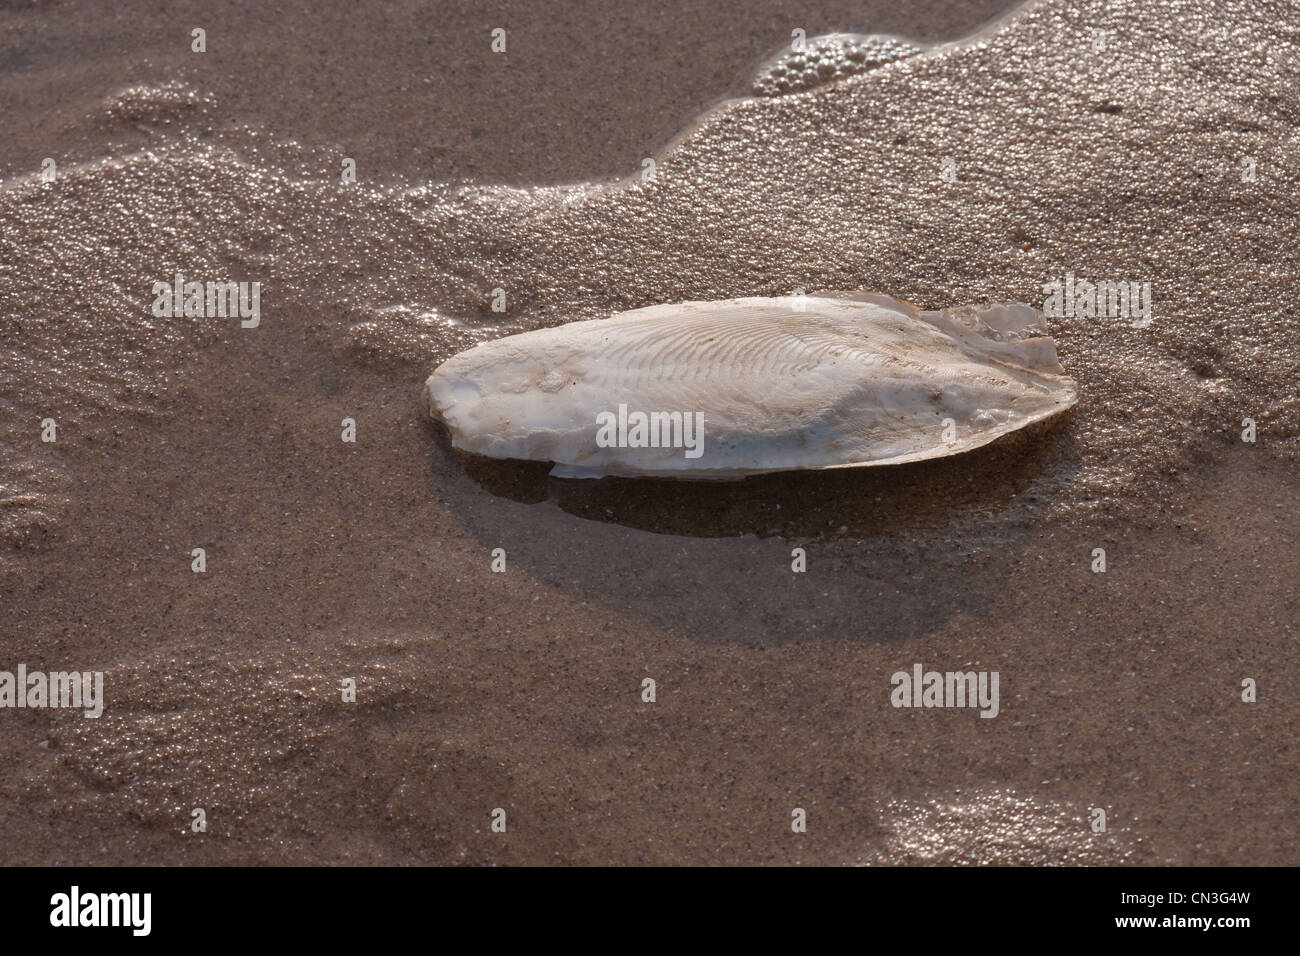 Cuttlefish Bone (Sepia officinalis). Calcareous support for living cephalod, Sea Palling beach, Norfolk. Stock Photo